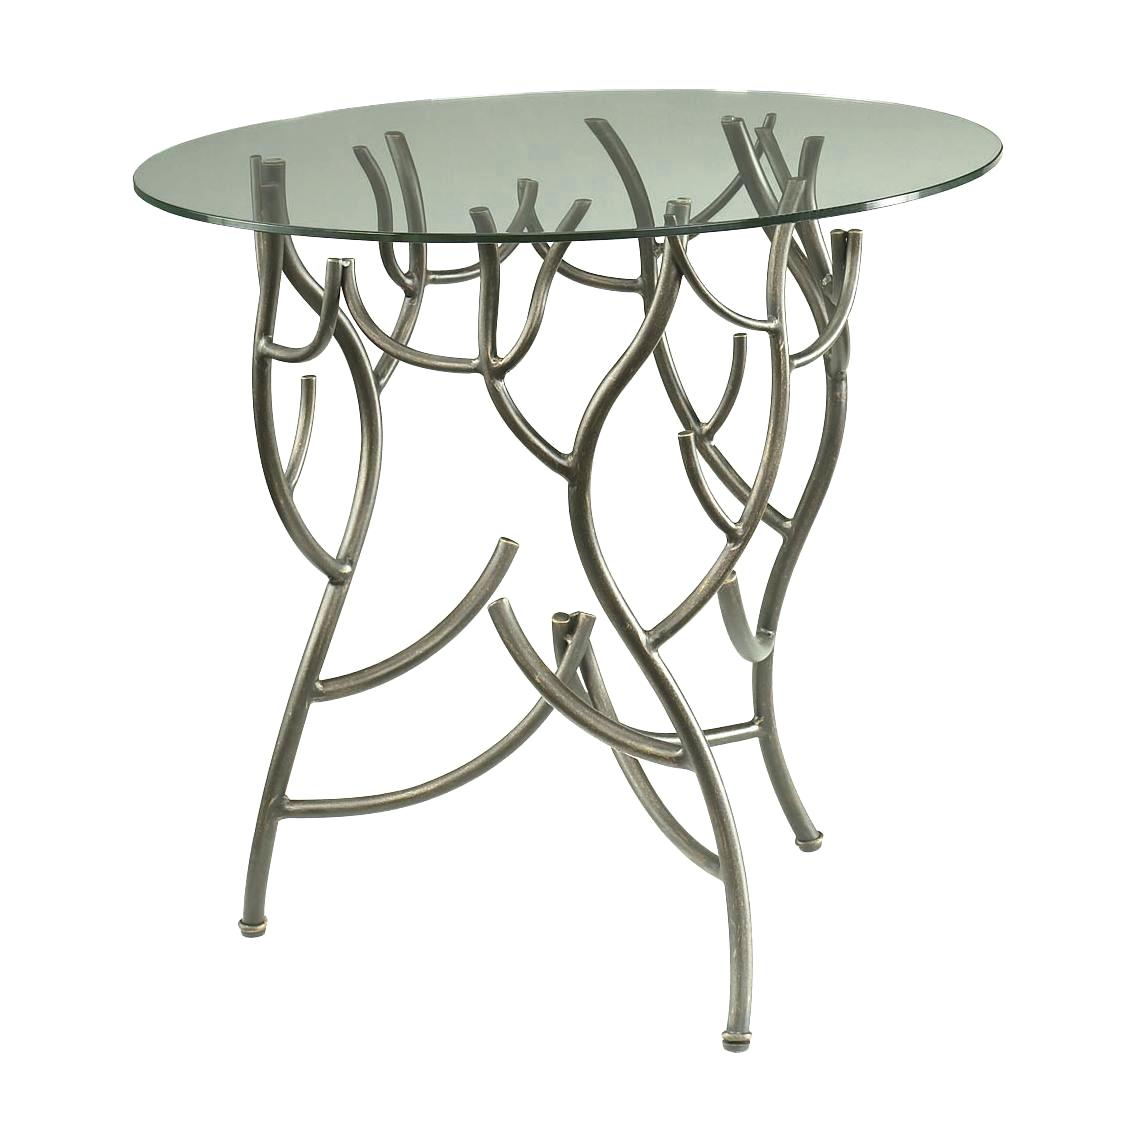 glass top accent table glamorous chrome finish uniquely crafted hidden treasures twig avery small most comfortable outdoor furniture decorative stands for living room backyard